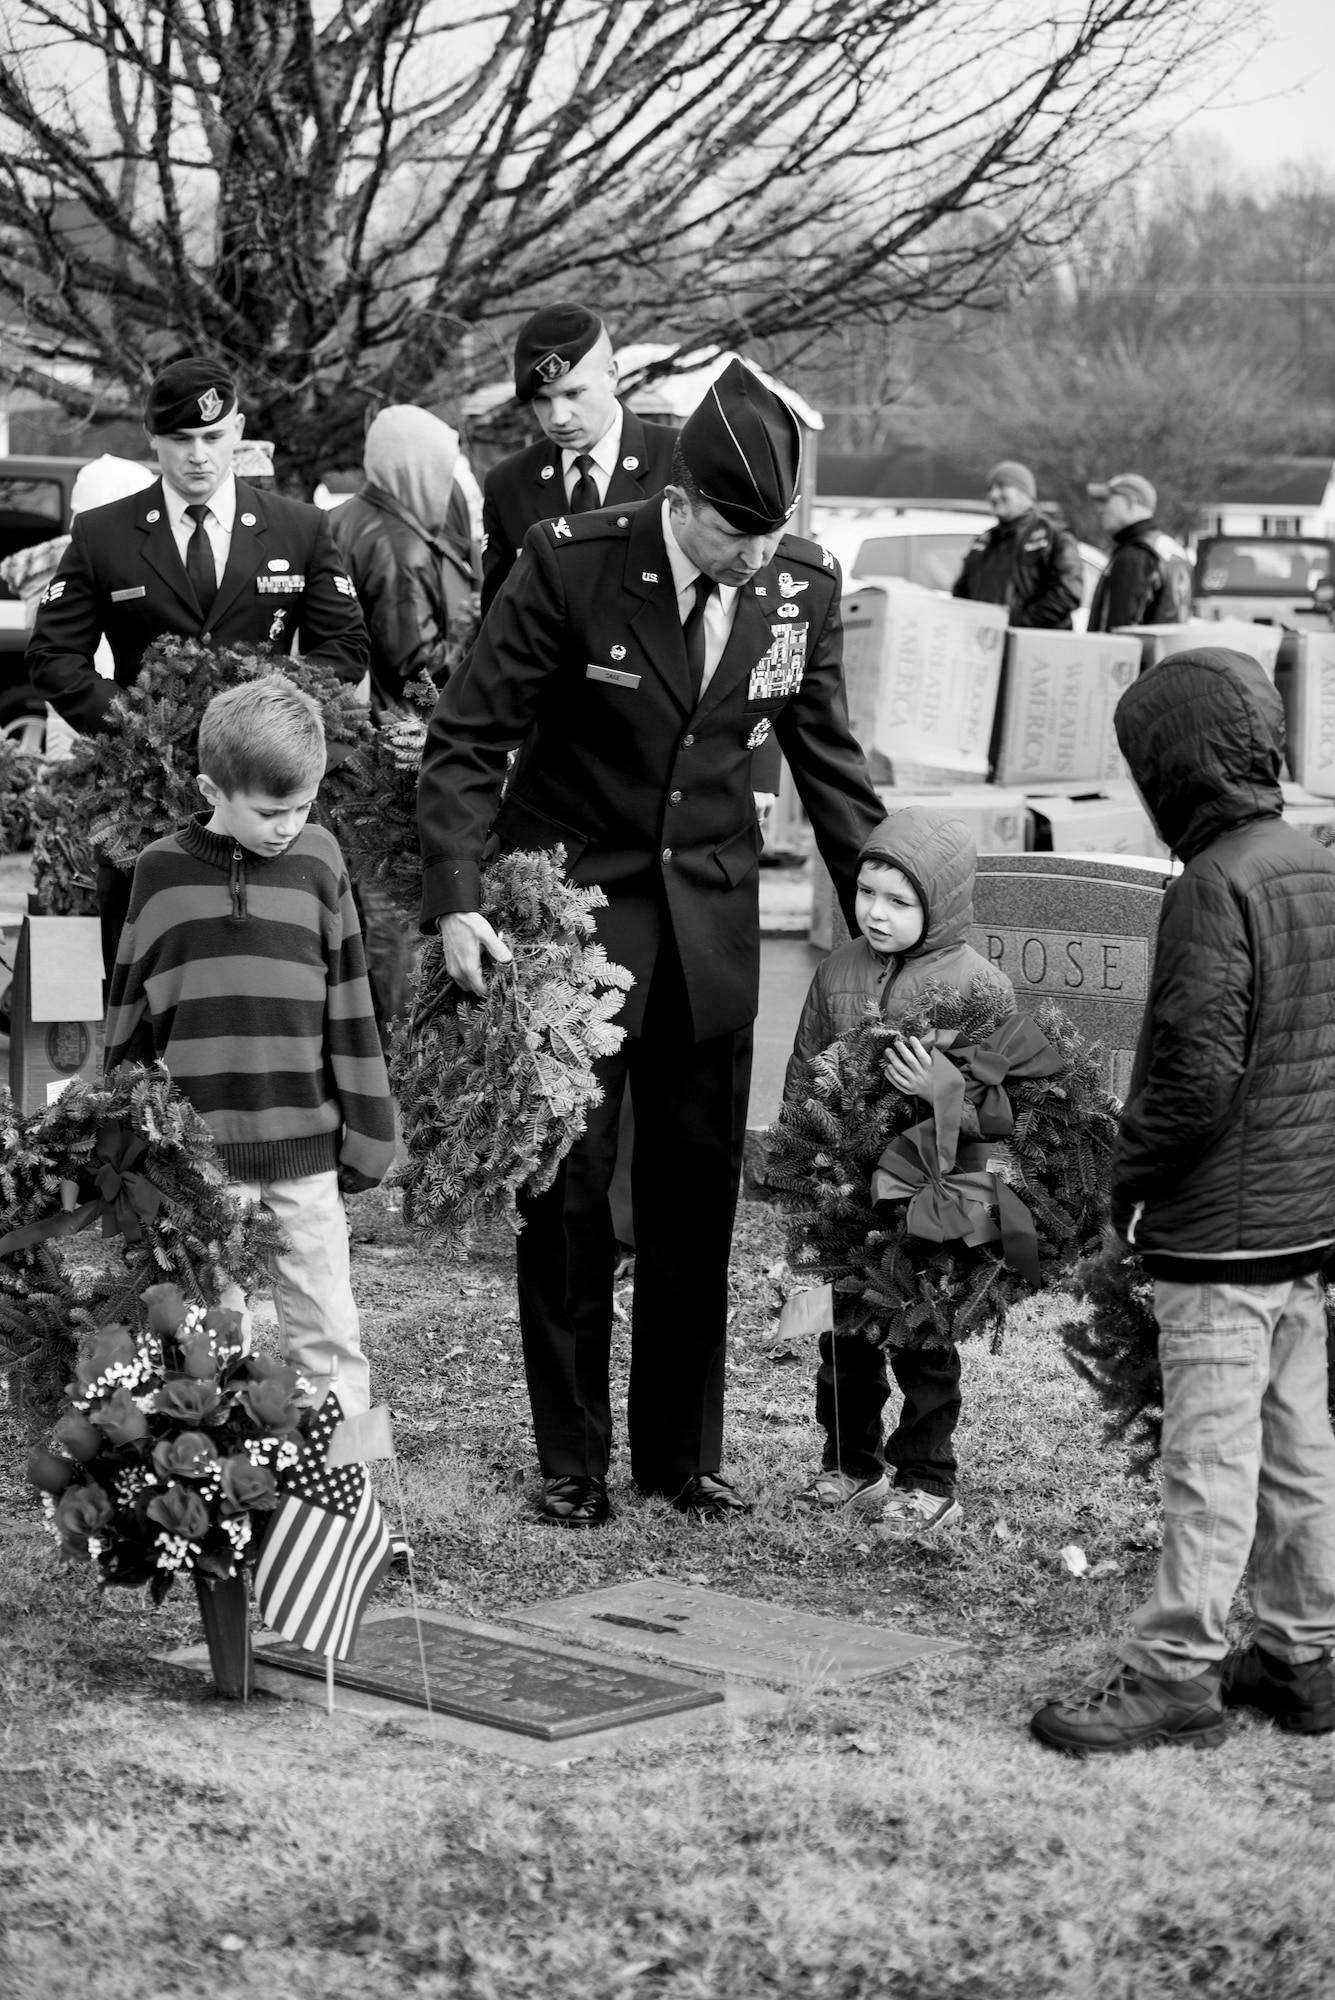 Col. Christopher Sage (center), 4th Fighter Wing commander, lays wreaths on a gravesite with his children during a Wreaths Across America ceremony, Dec. 17, 2016, at Evergreen Memorial Cemetery in Princeton, North Carolina. Wreaths Across America began in Maine 25 years ago and more than 1,200 locations participate worldwide today. (U.S. Air Force photo by Airman Shawna L. Keyes)